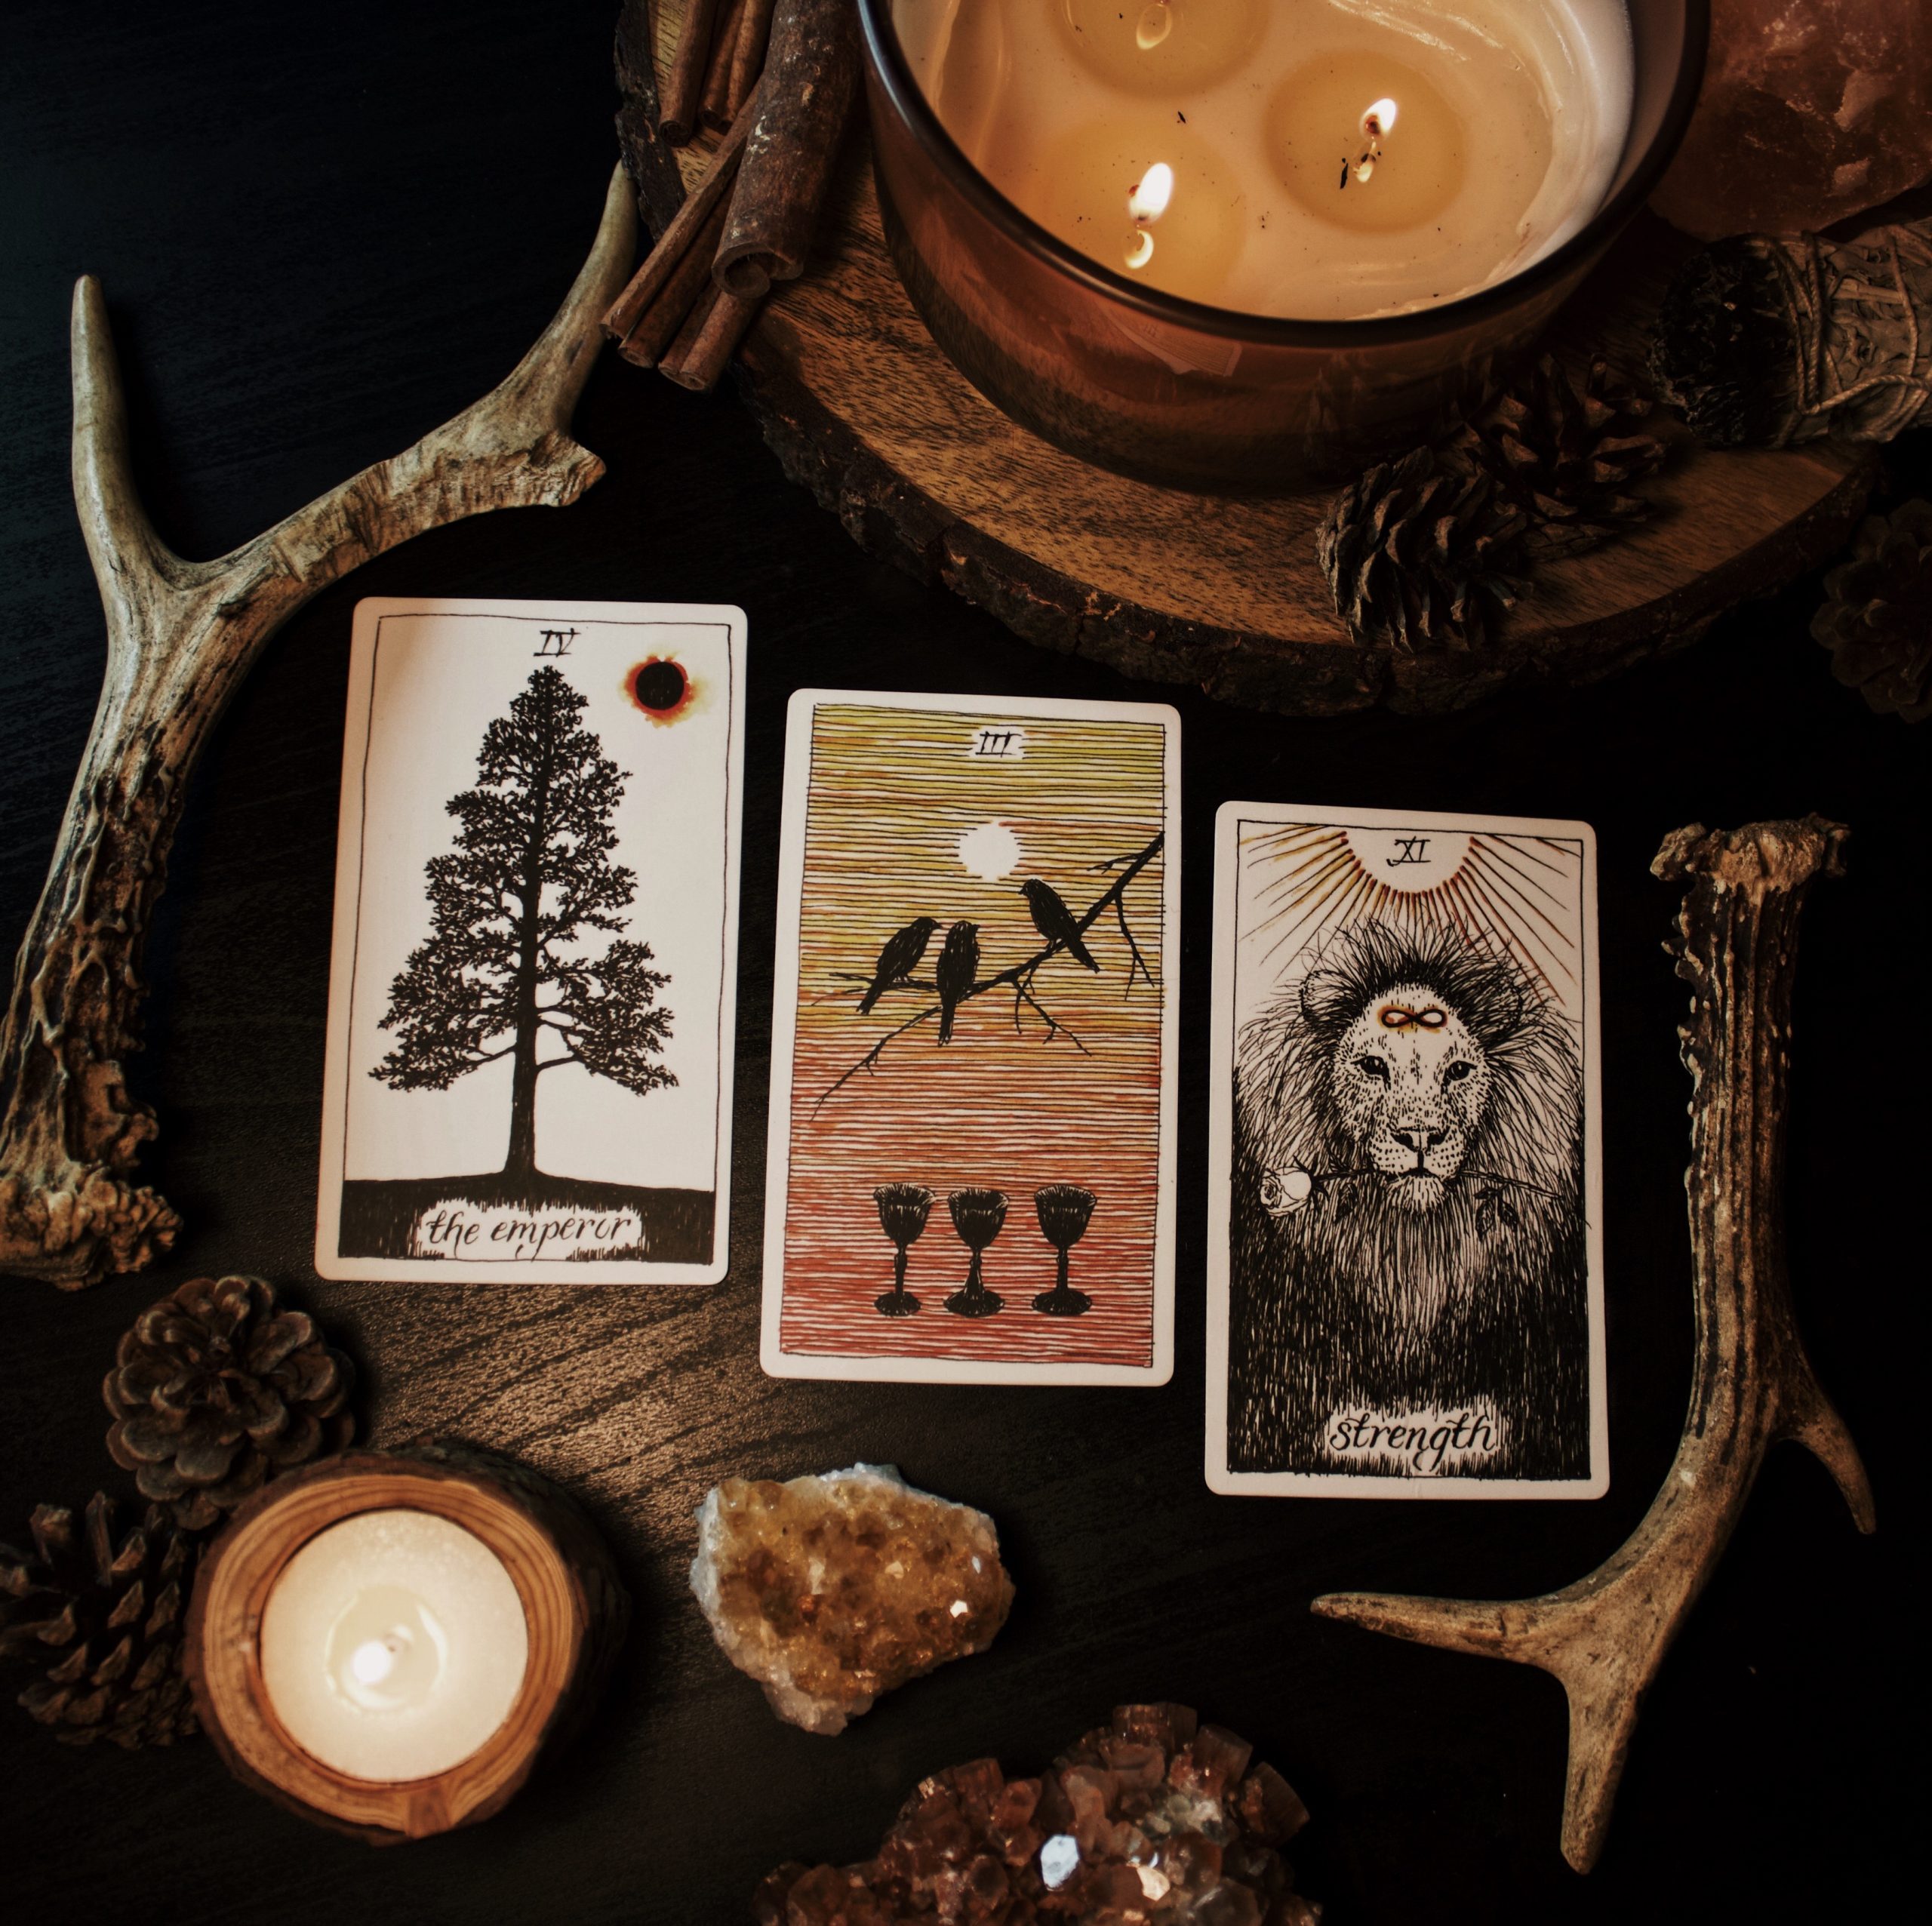 A Skeptic’s Guide to Tarot